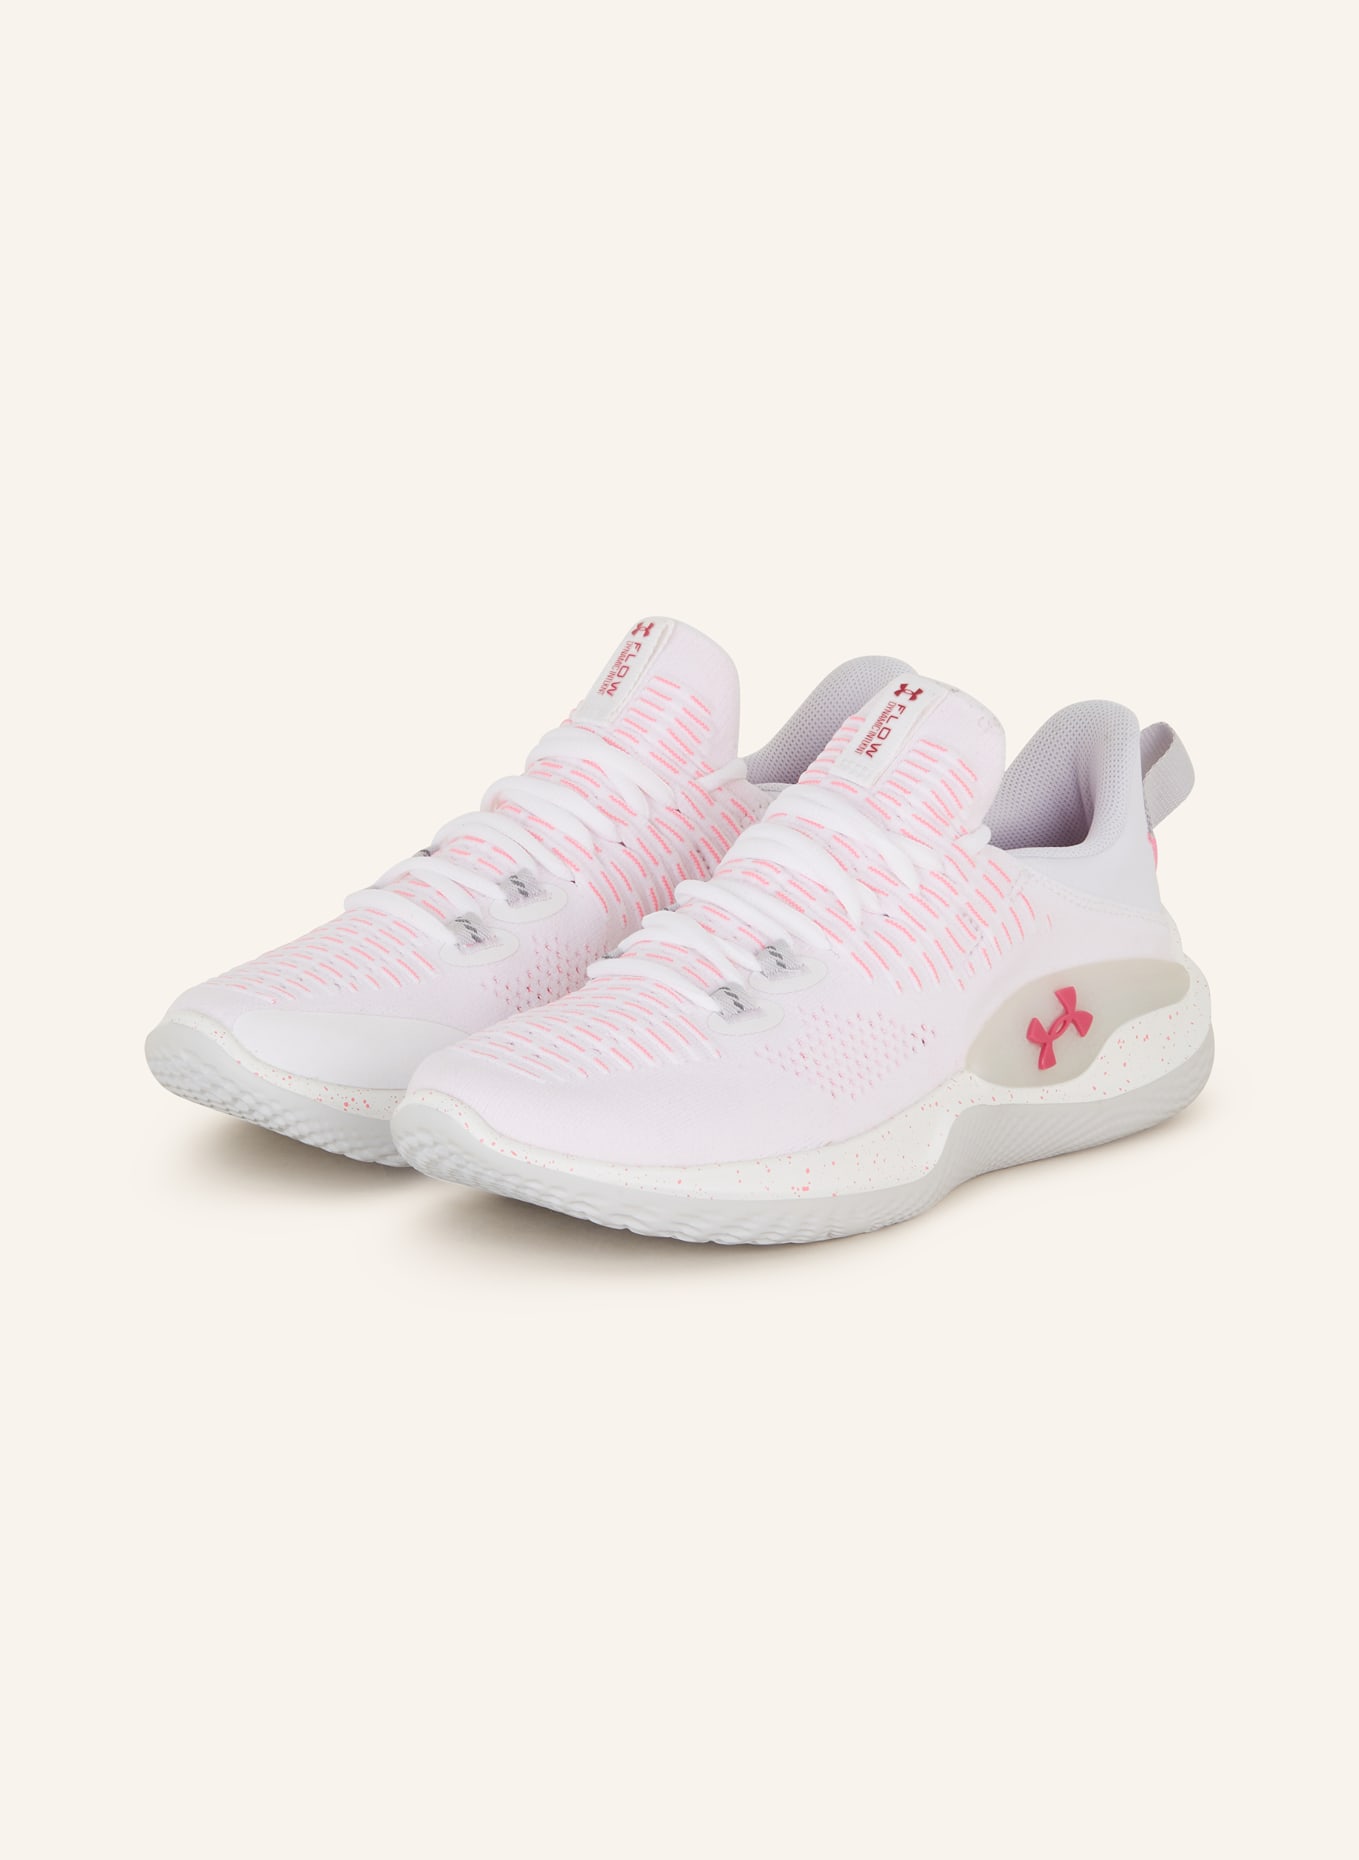 UA Flow Shoes in Pink